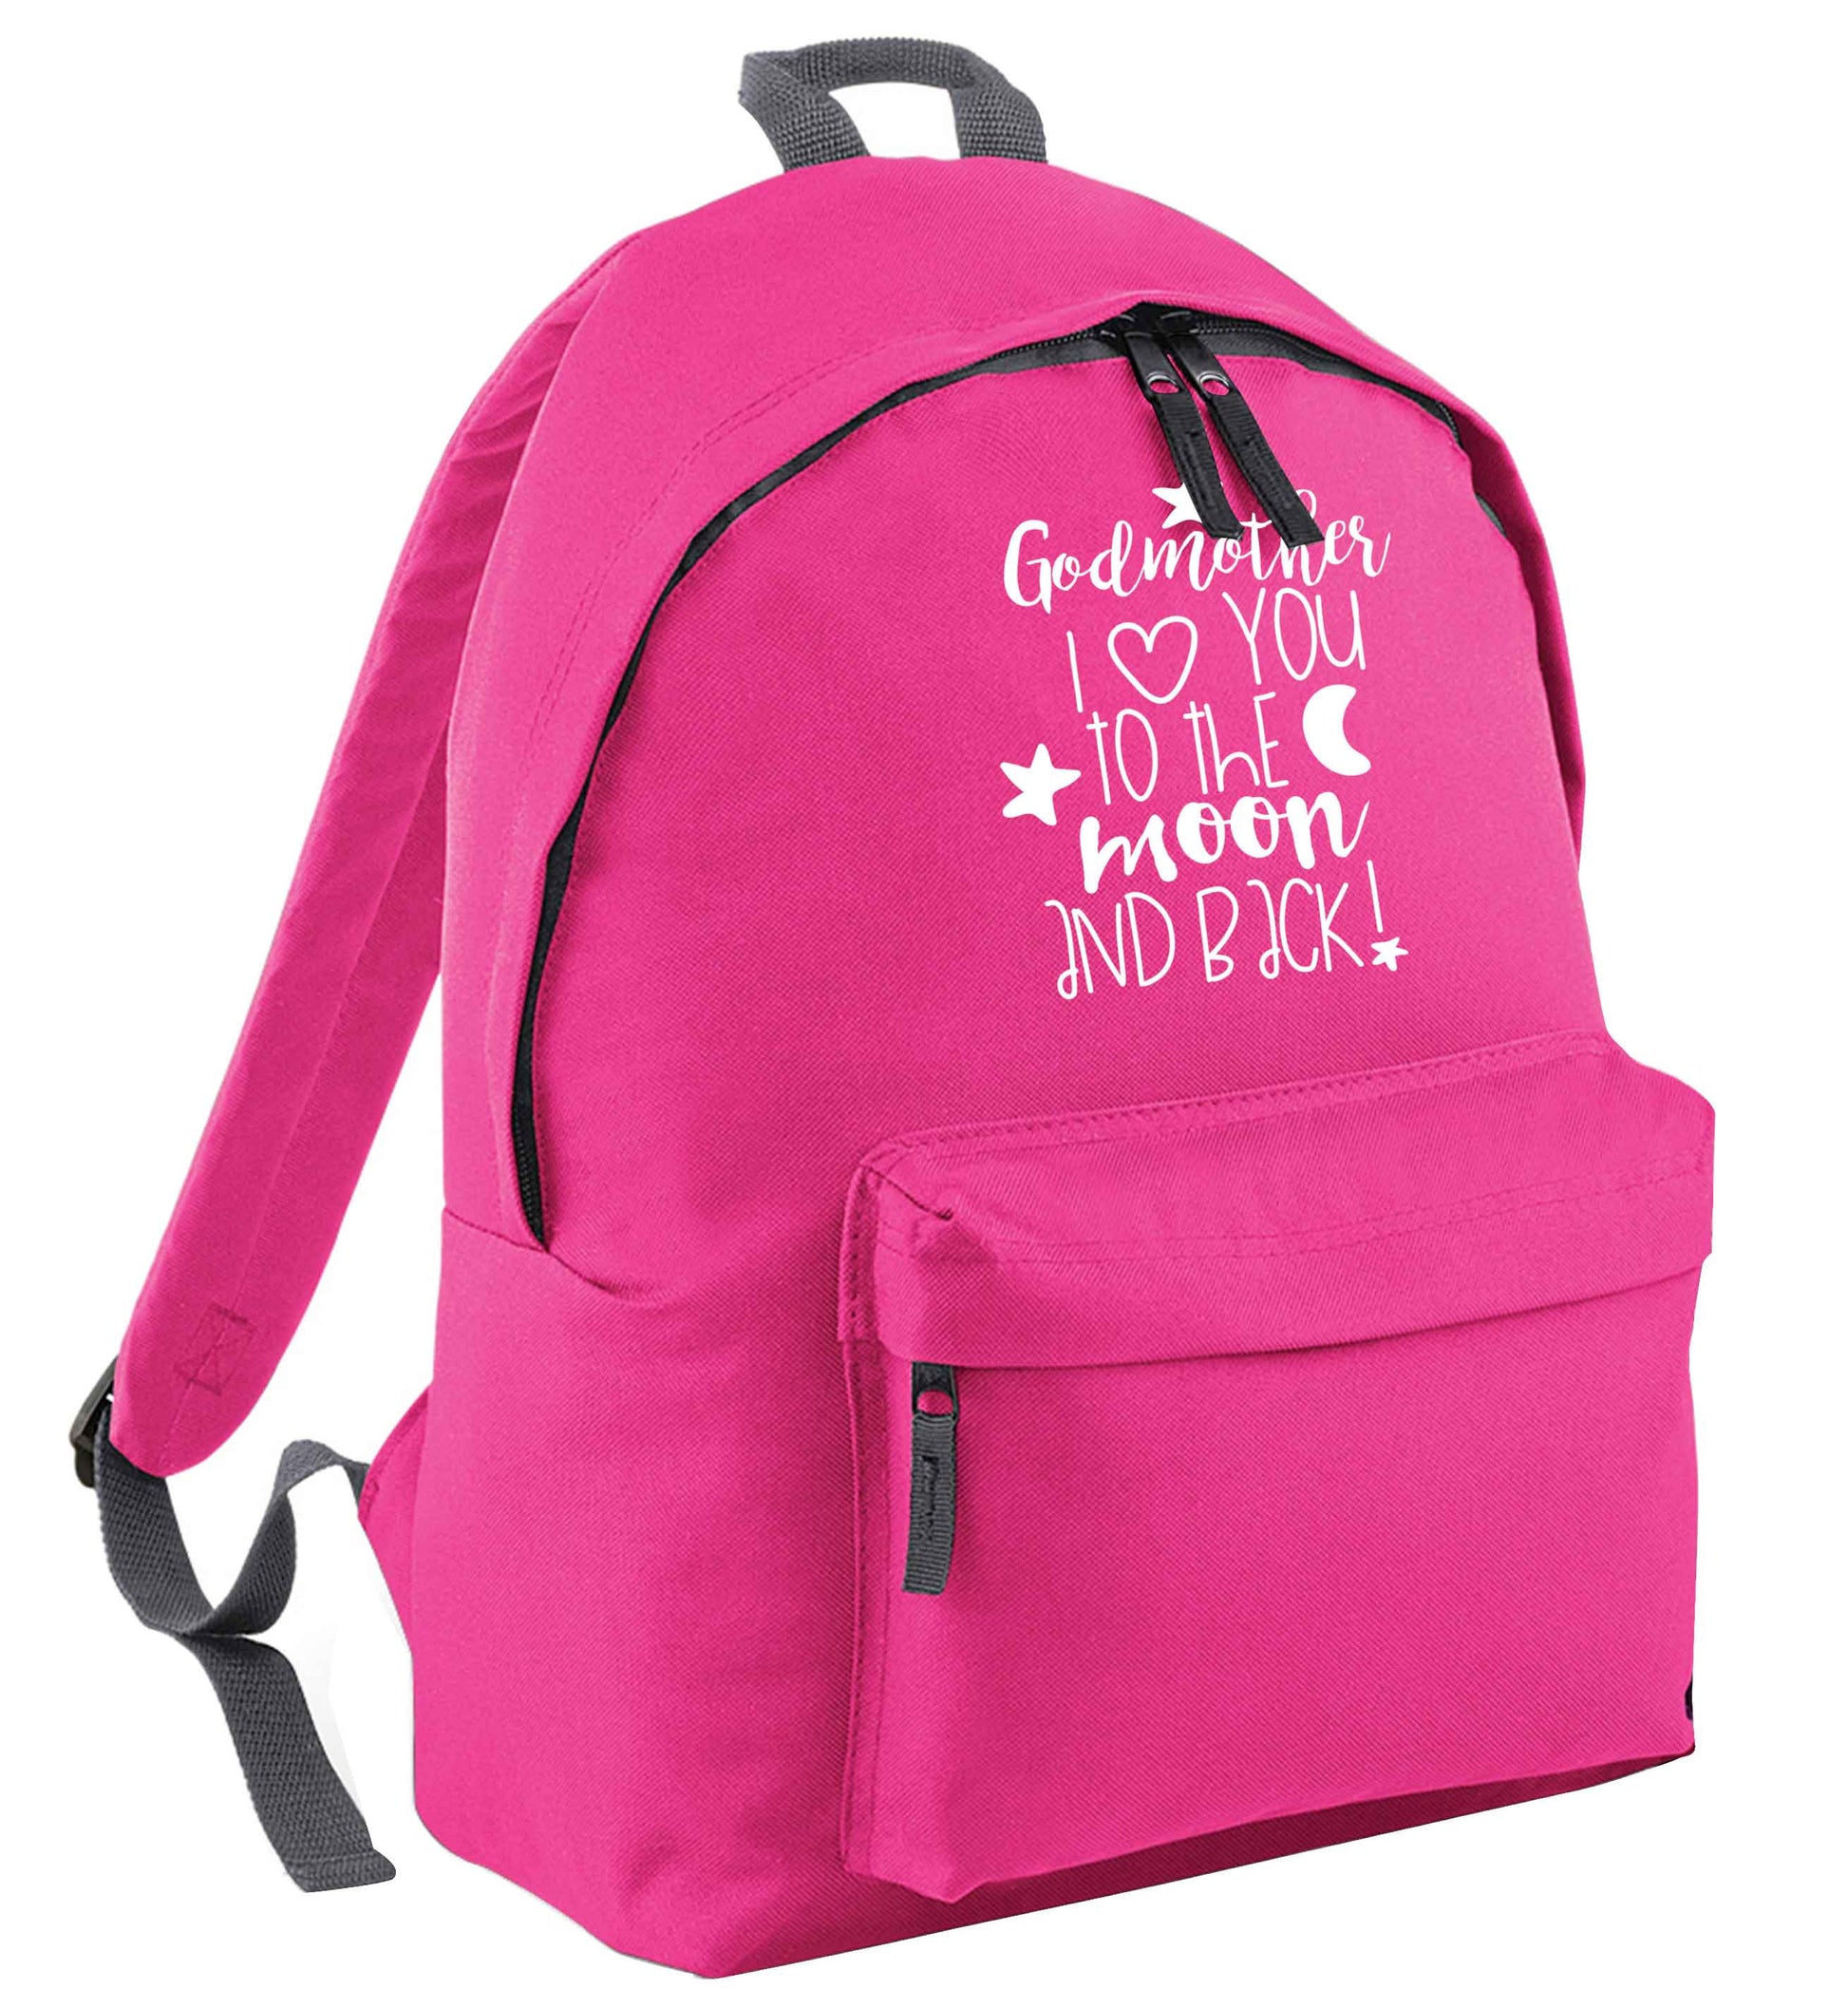 Godmother I love you to the moon and back pink adults backpack